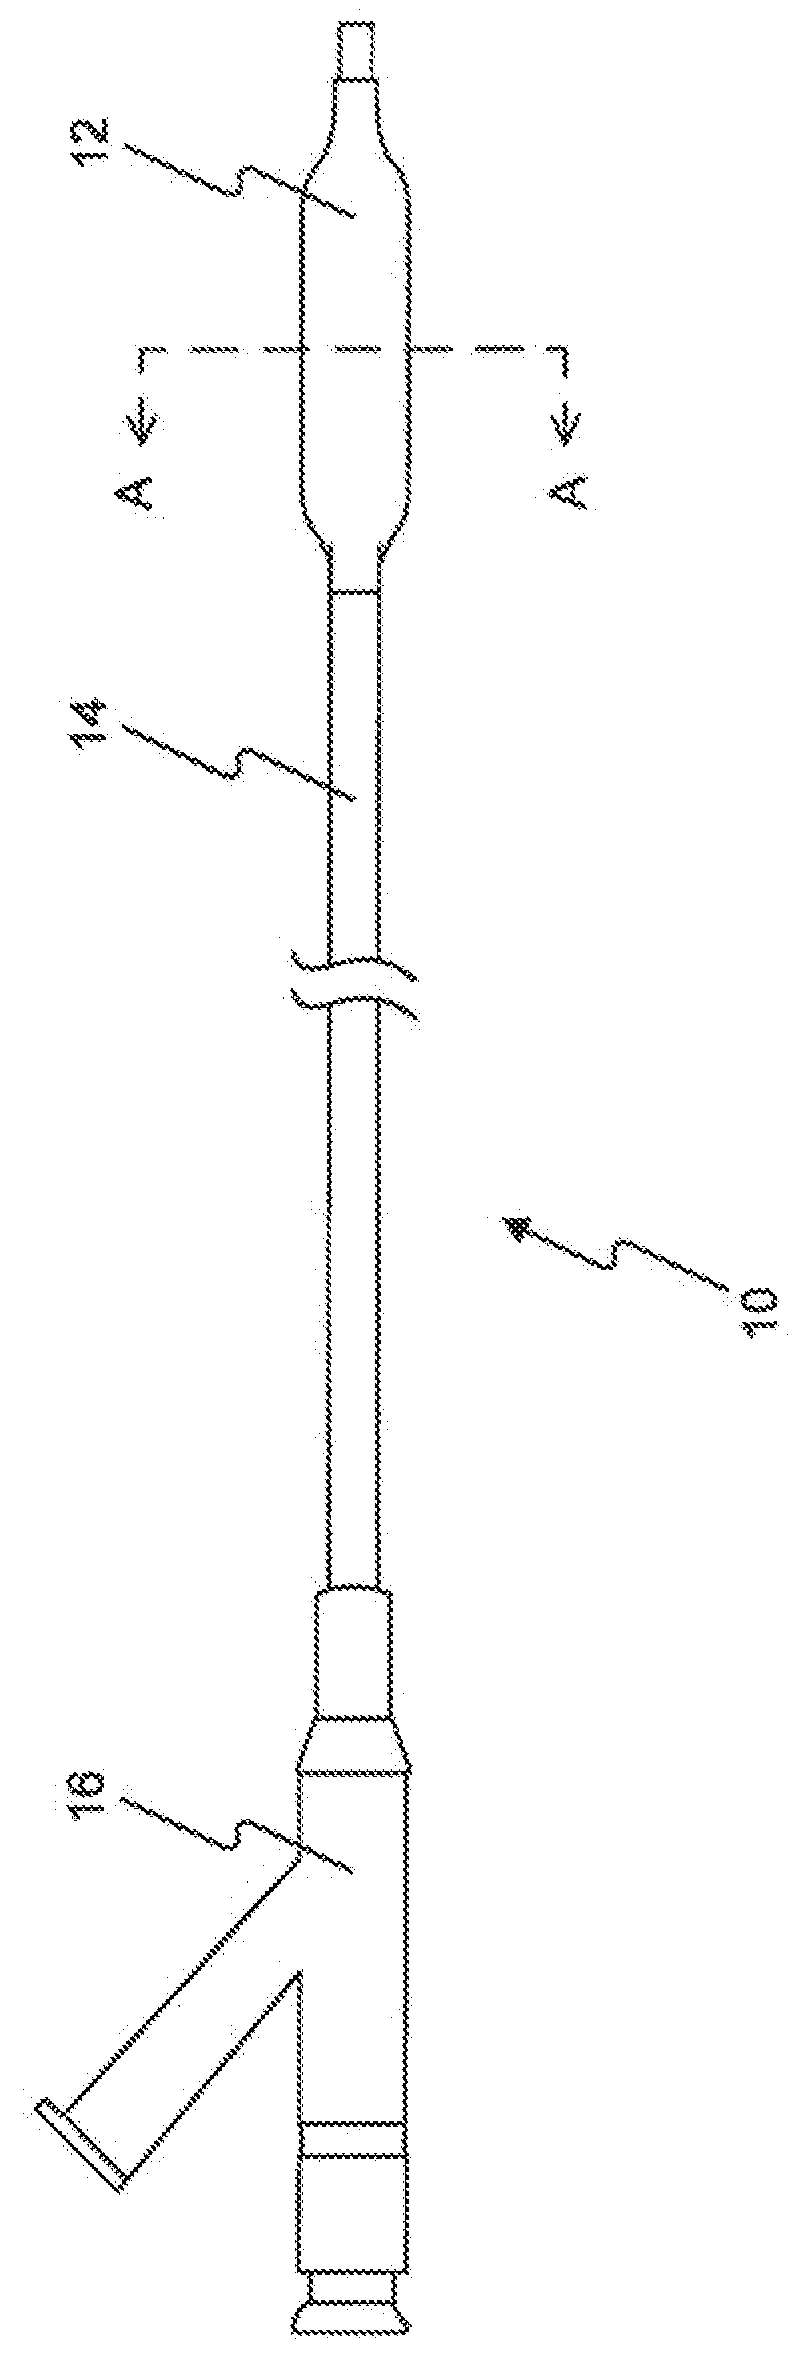 Drug coated balloon catheters for nonvascular strictures